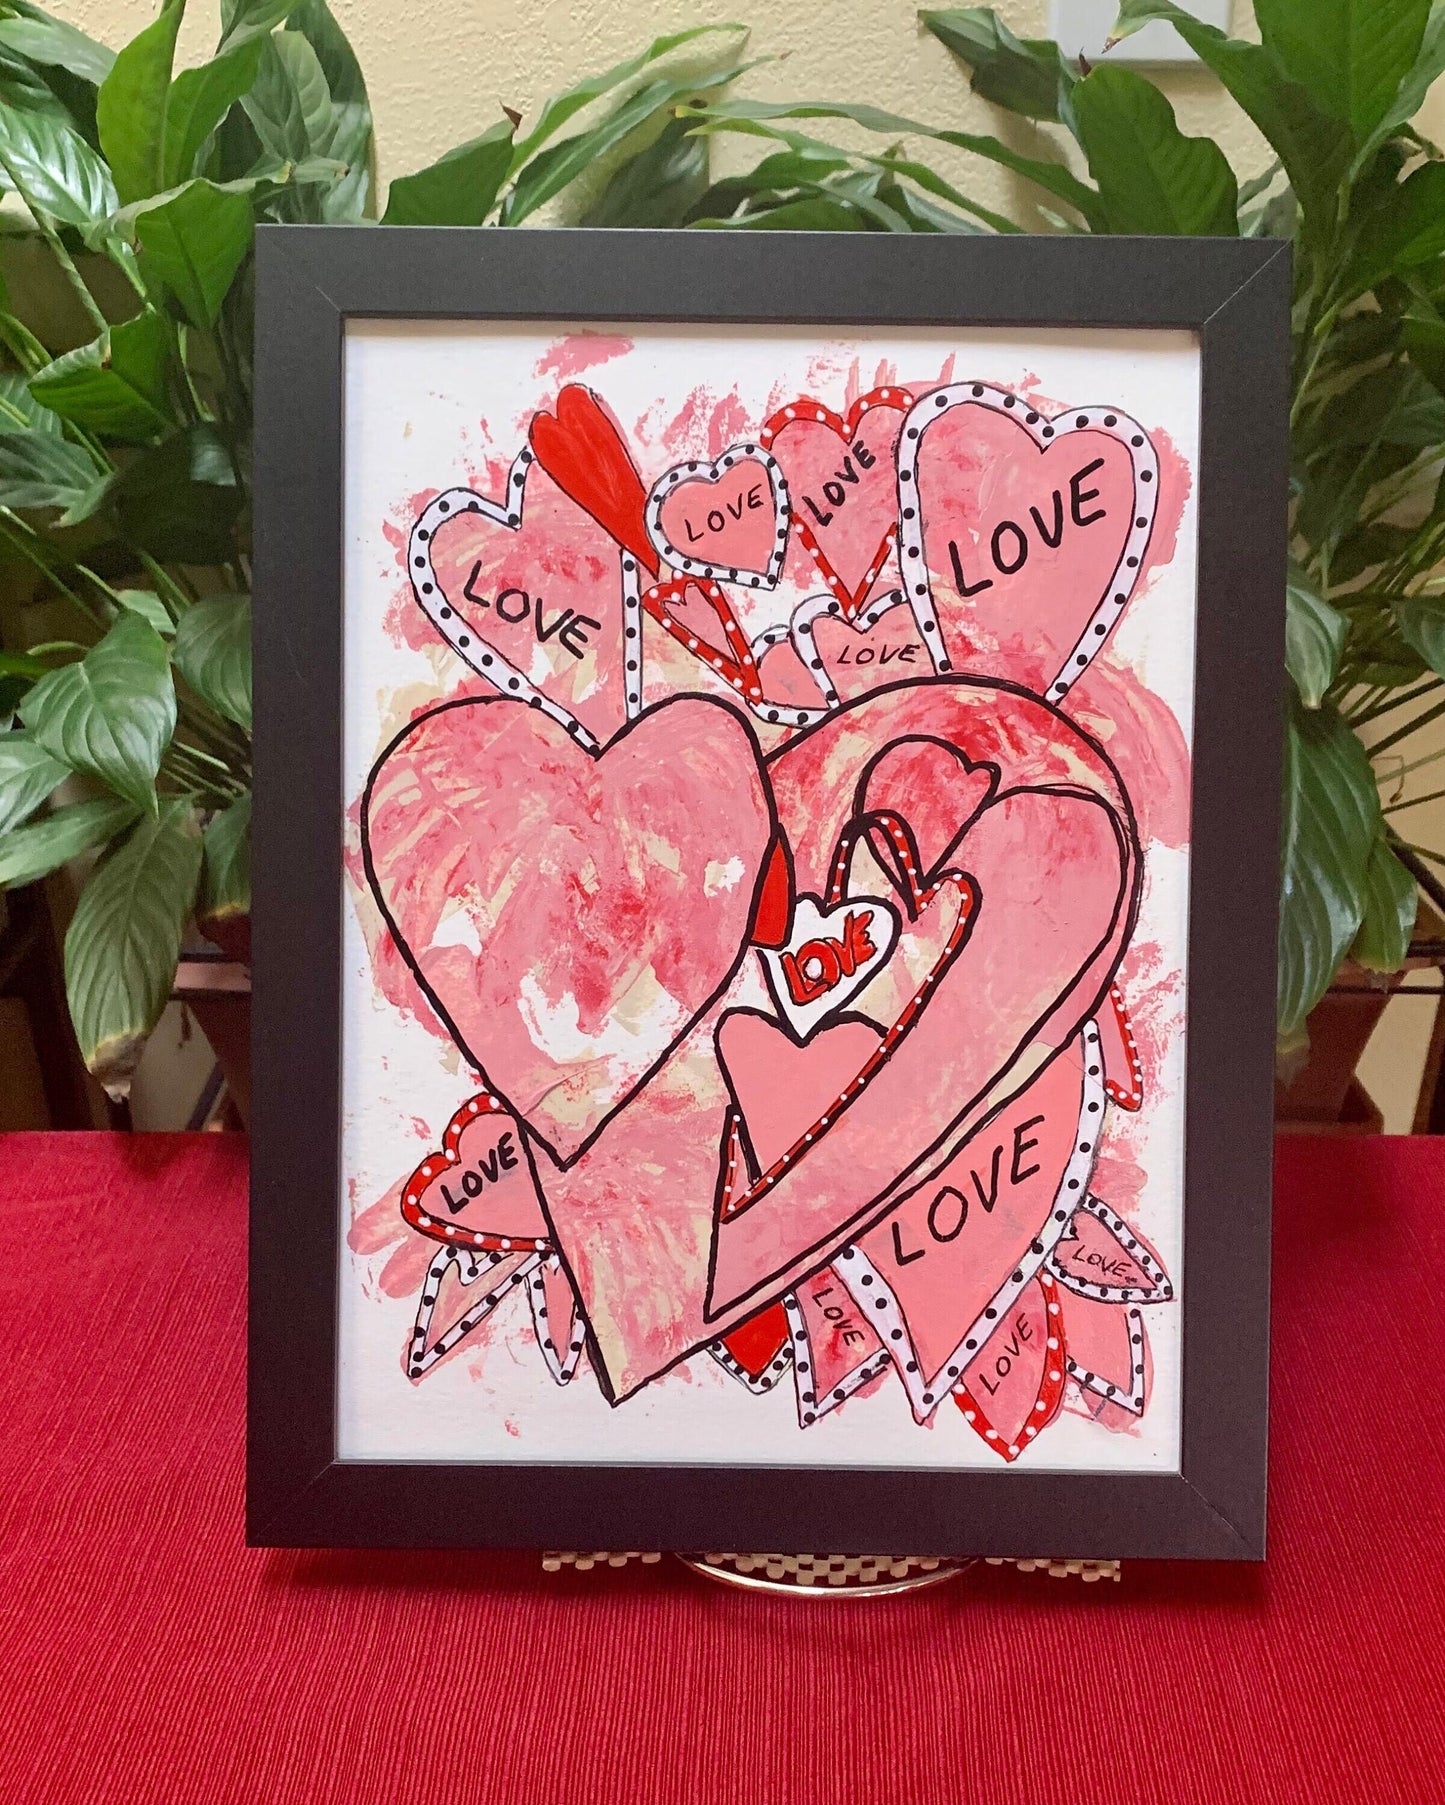 Colorful Pink Graffiti Heart Love Painting for wall decor Perfect appreciation gift Rainbow color art Black frame ready to hang